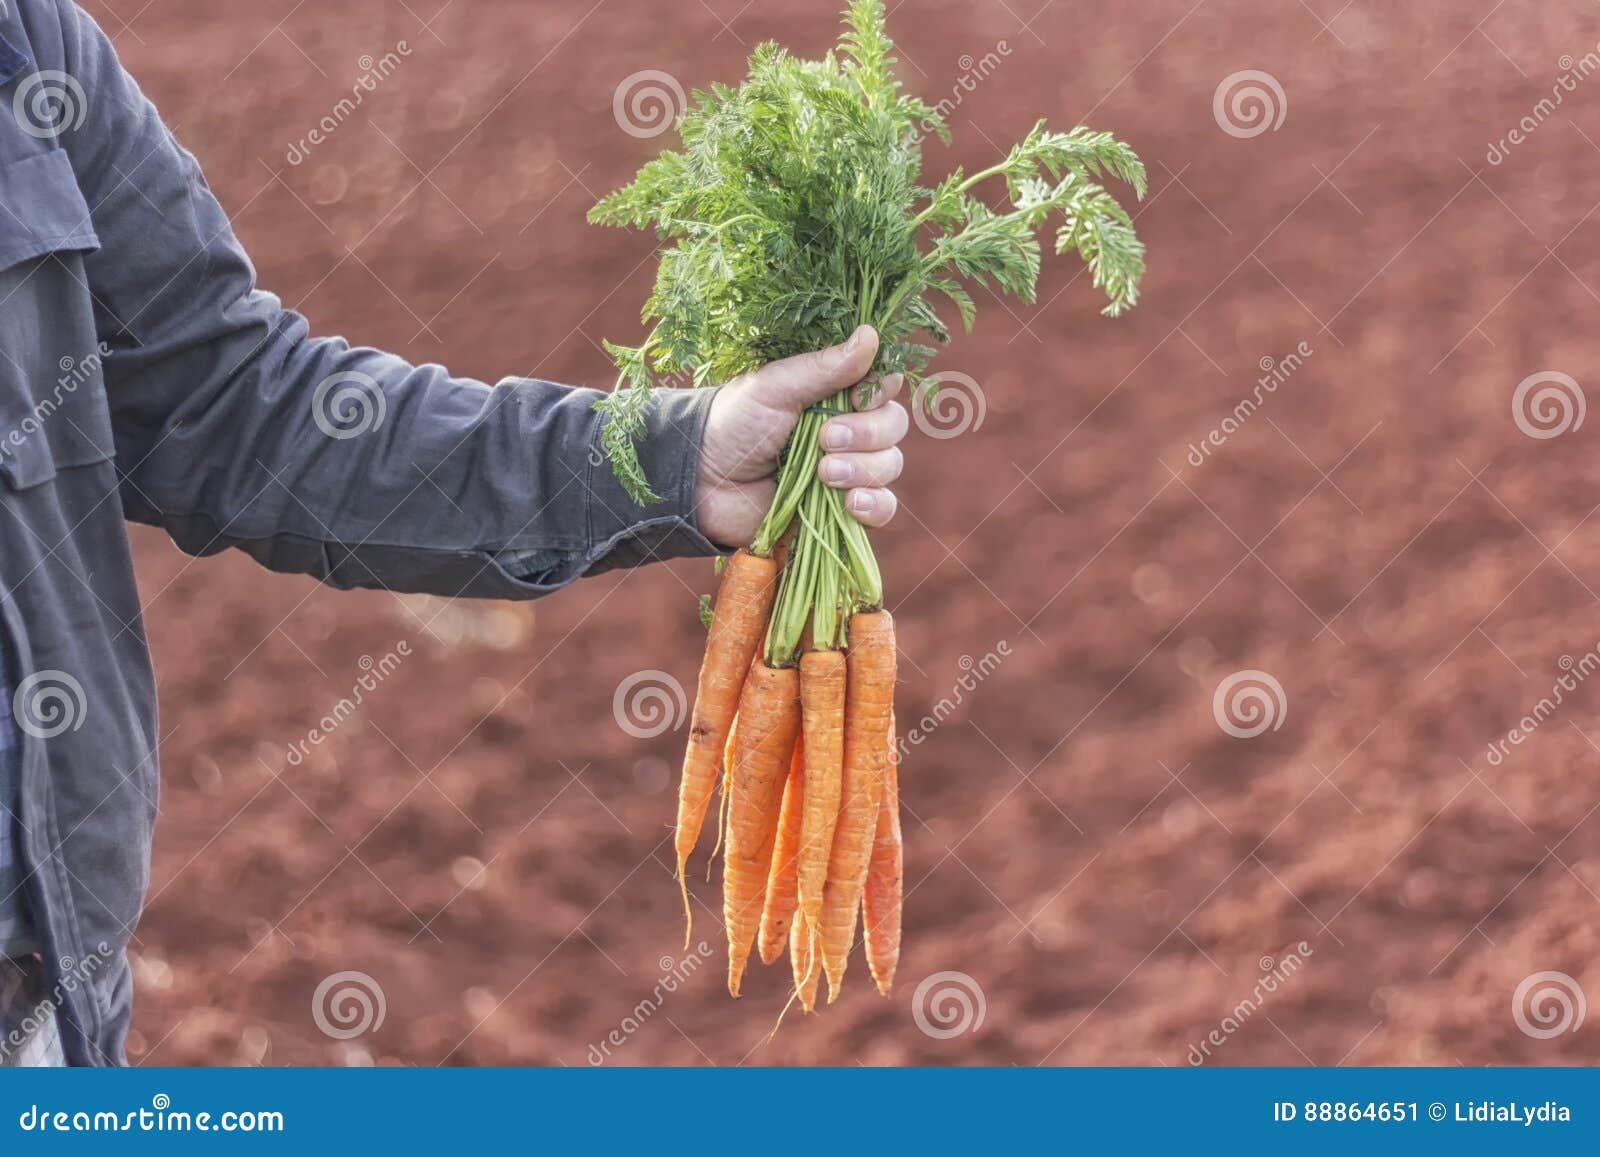 farmer holding a bunch of carrots